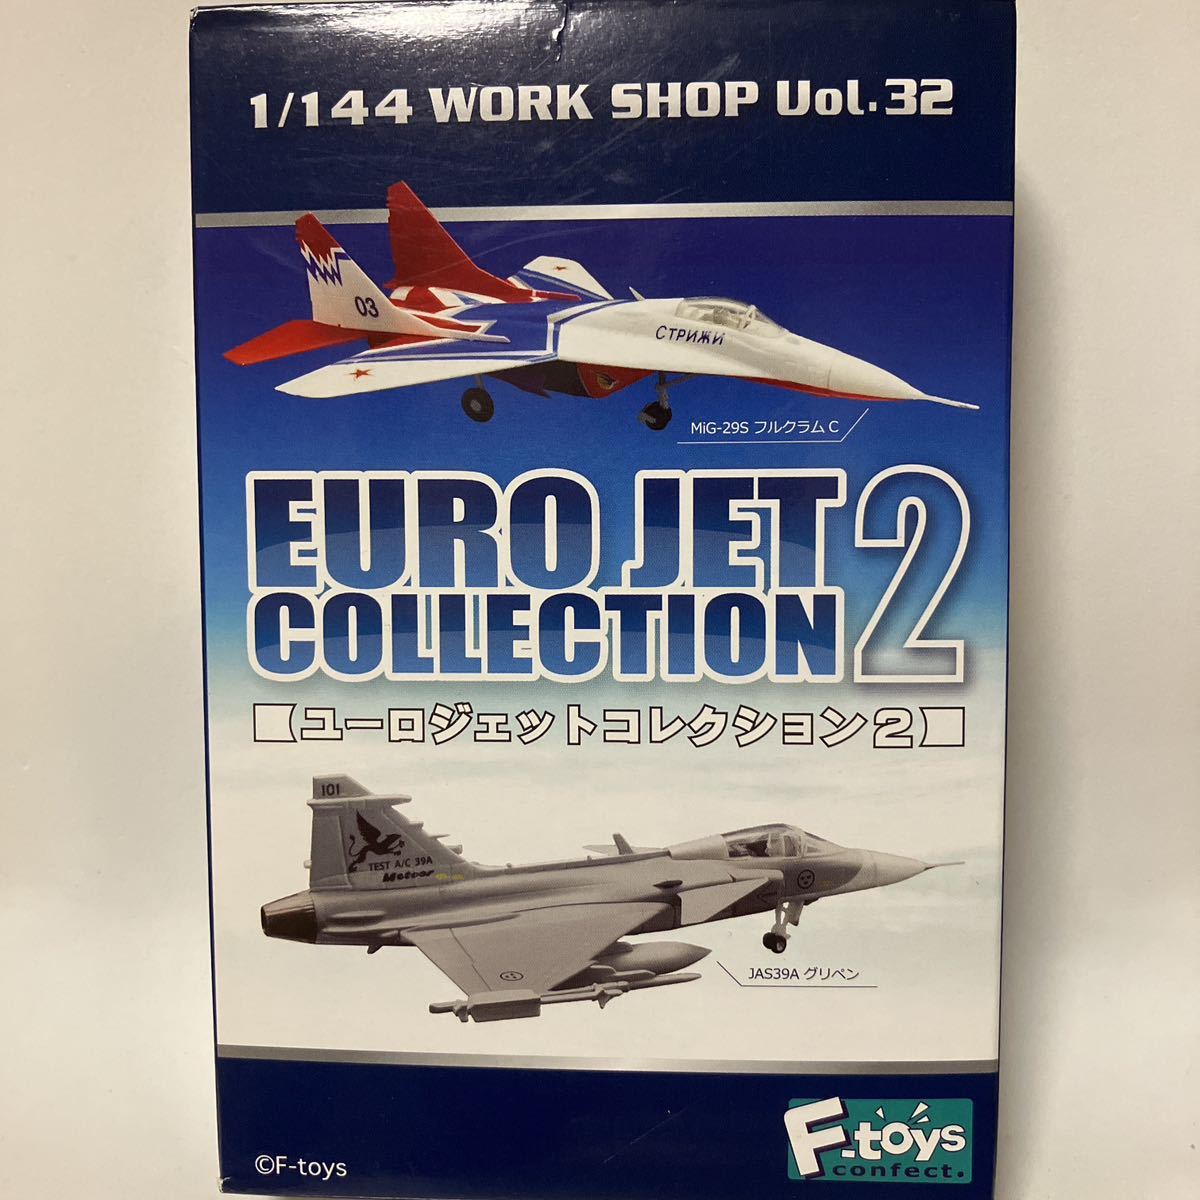 1/144 MiG-29S fulcrum Cuklaina Air Force / torque meni Stan Air Force selection possible euro jet collection 2ef toys 